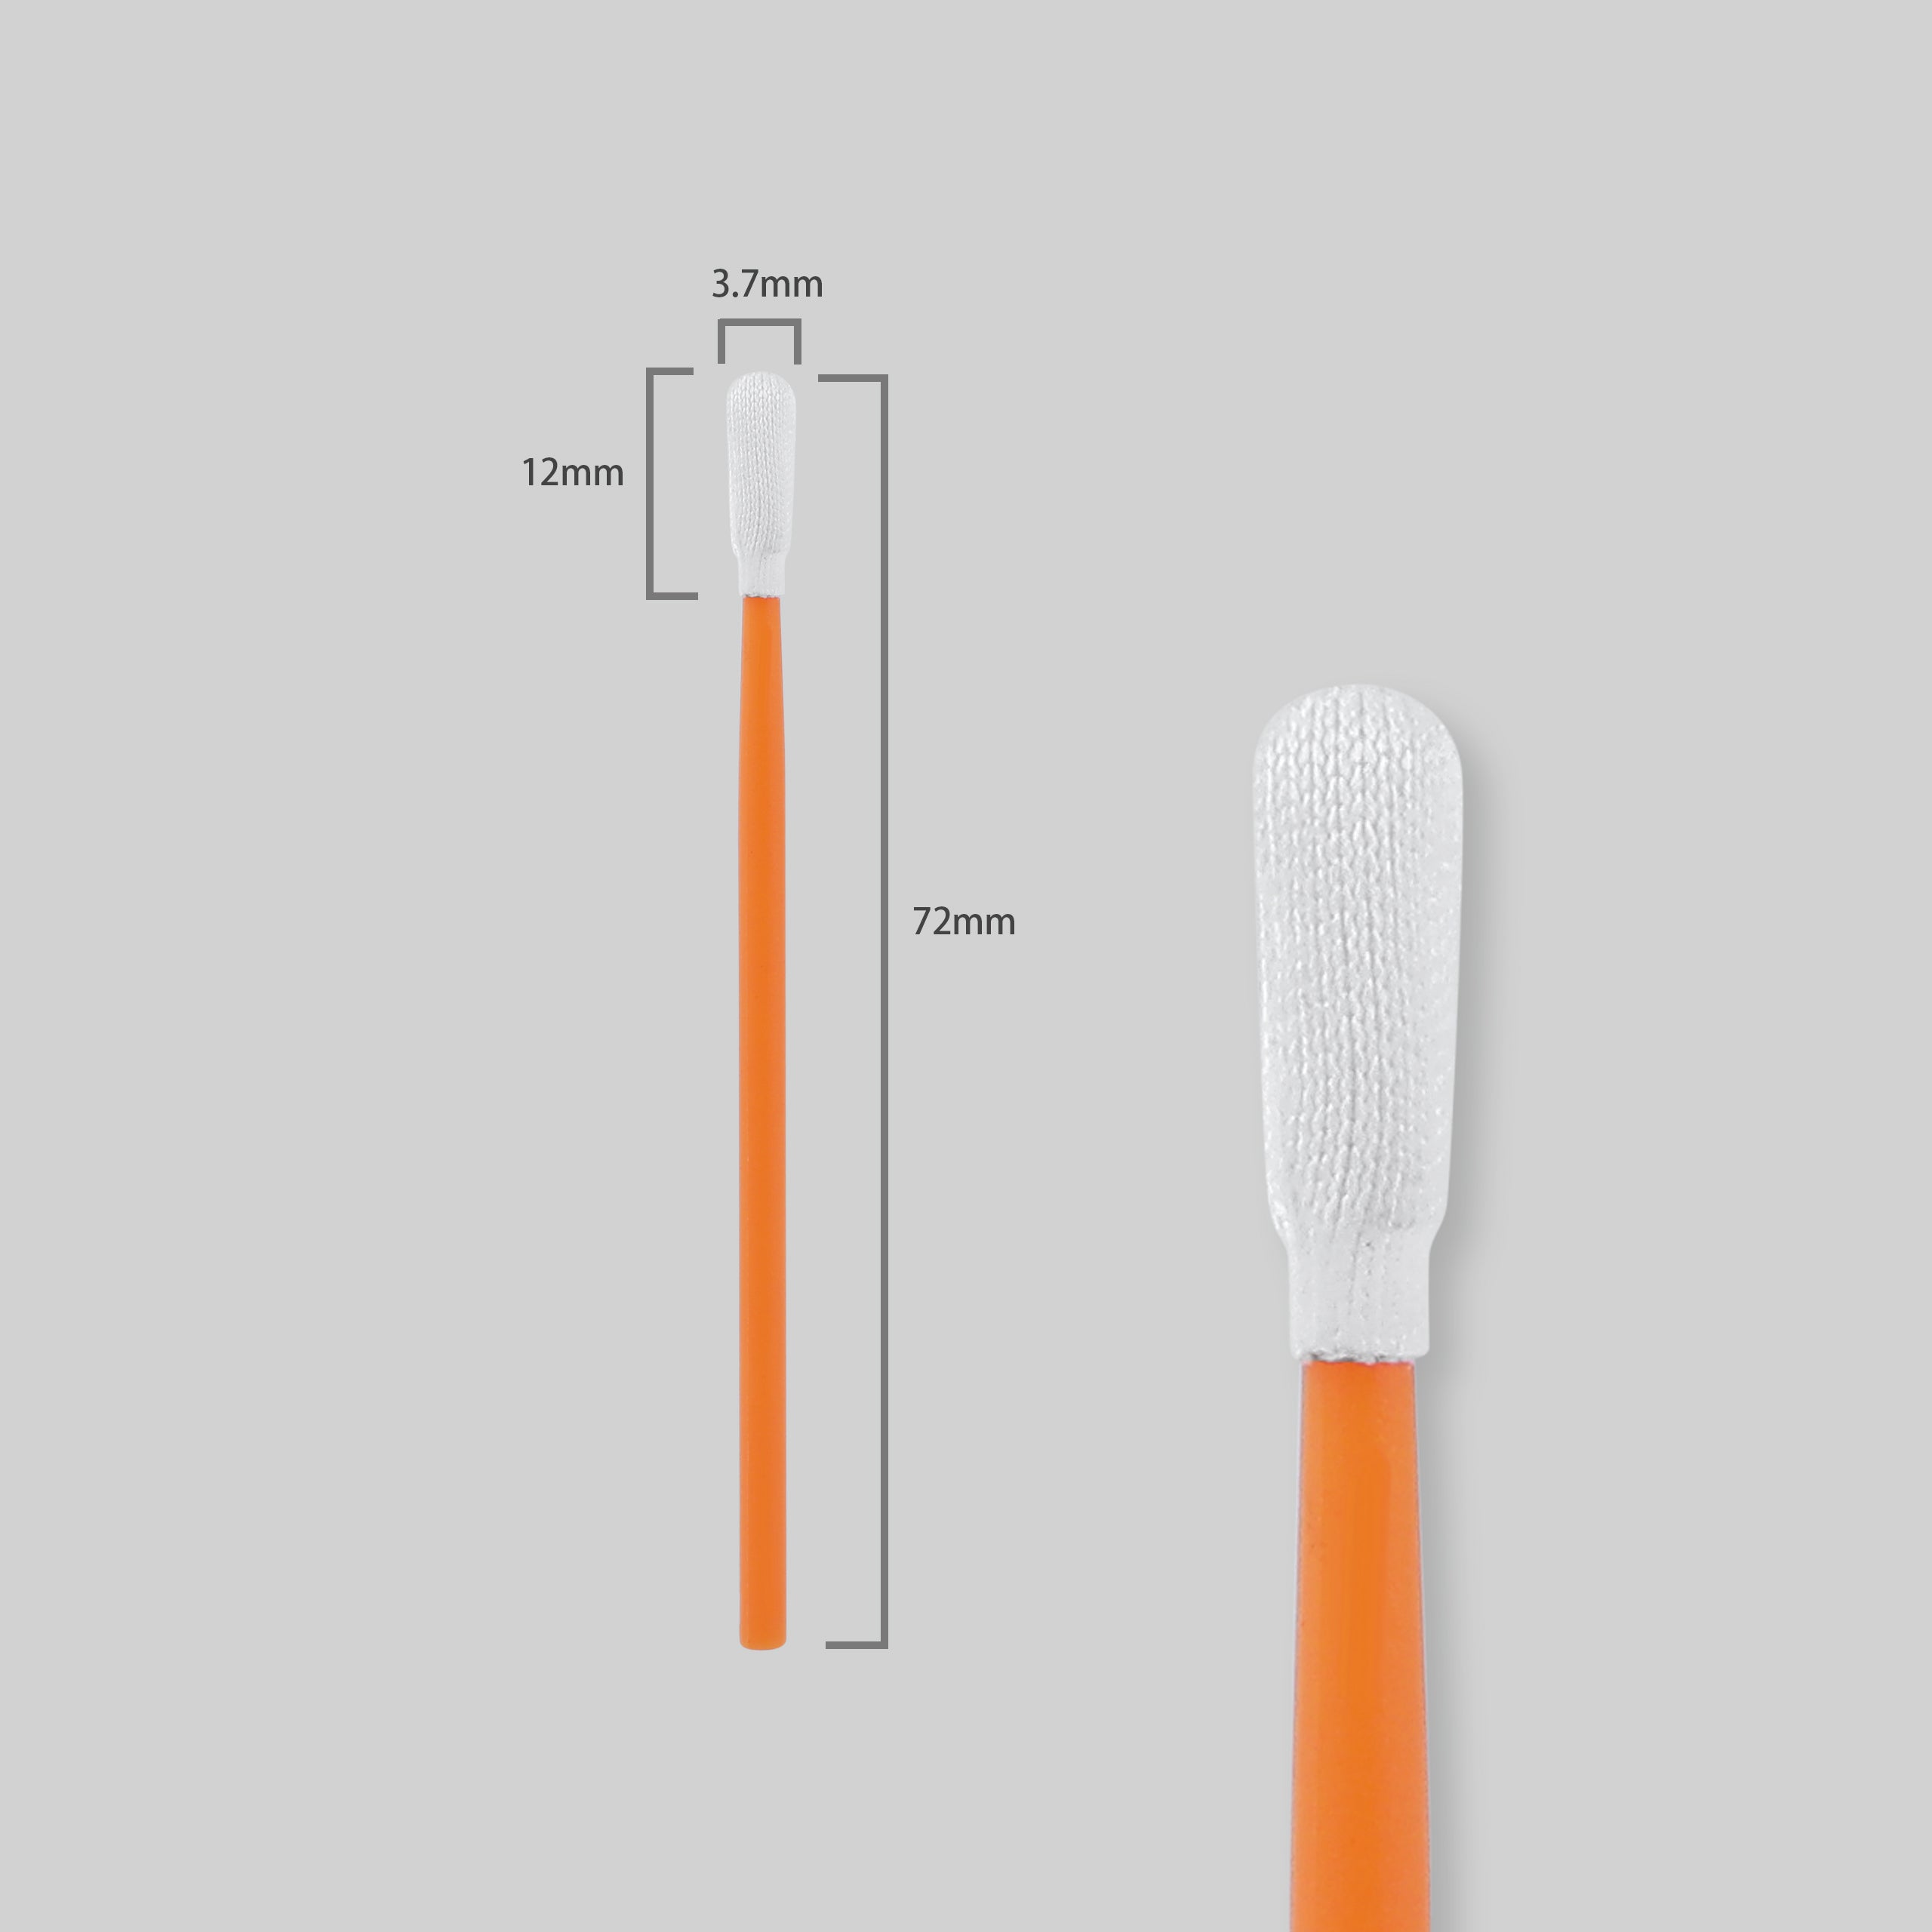 2.8" microfiber Polyester lint-free cleaning Swabs (1,000 pcs, Orange, Length/Swab Head Width=72 mm/3.2 mm, Small Round Head) (No. A5837A)